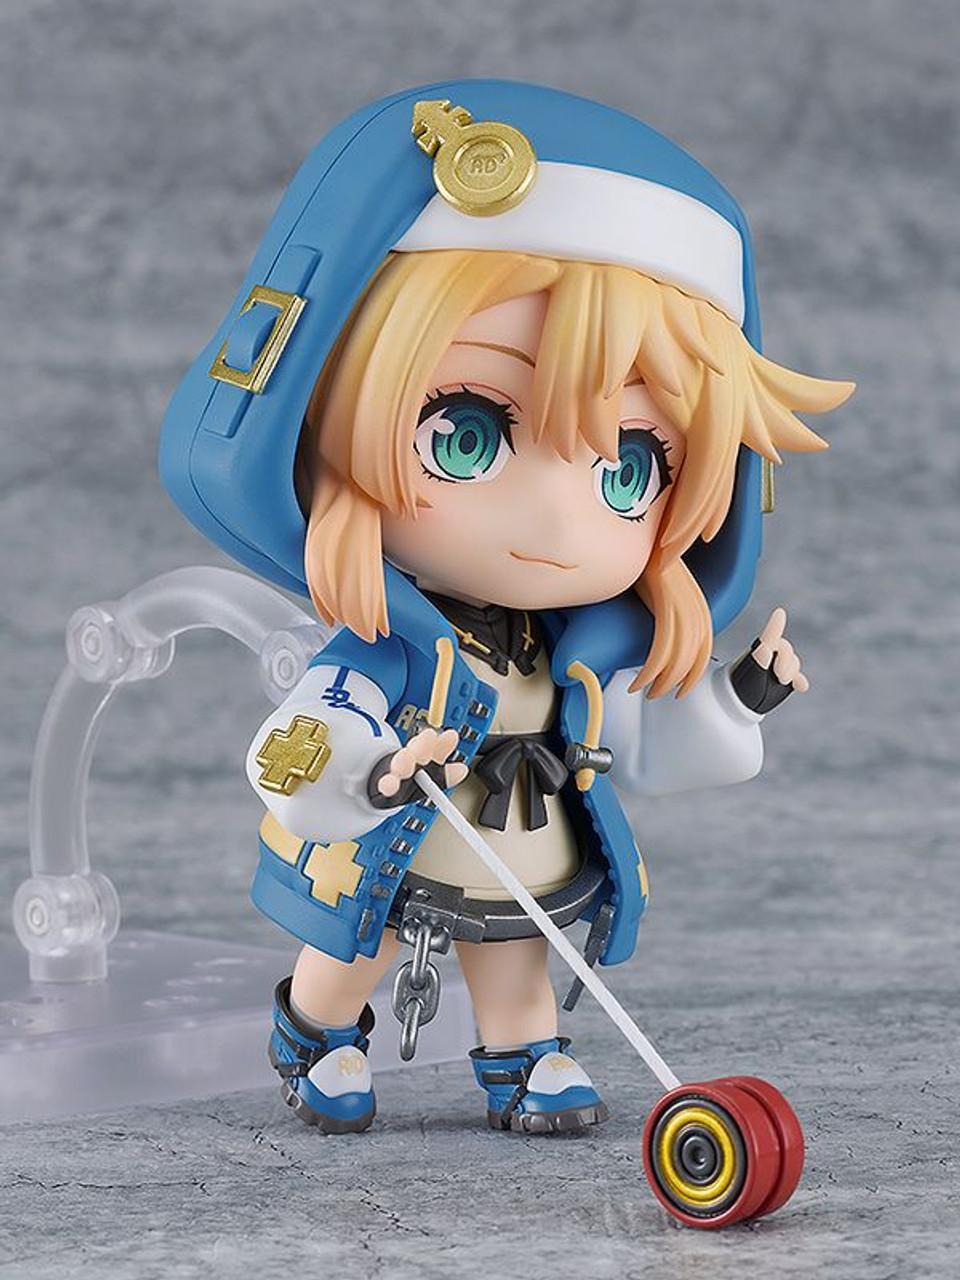 Guilty Gear Strive Bridget's Roger Plush Available For Pre-Order